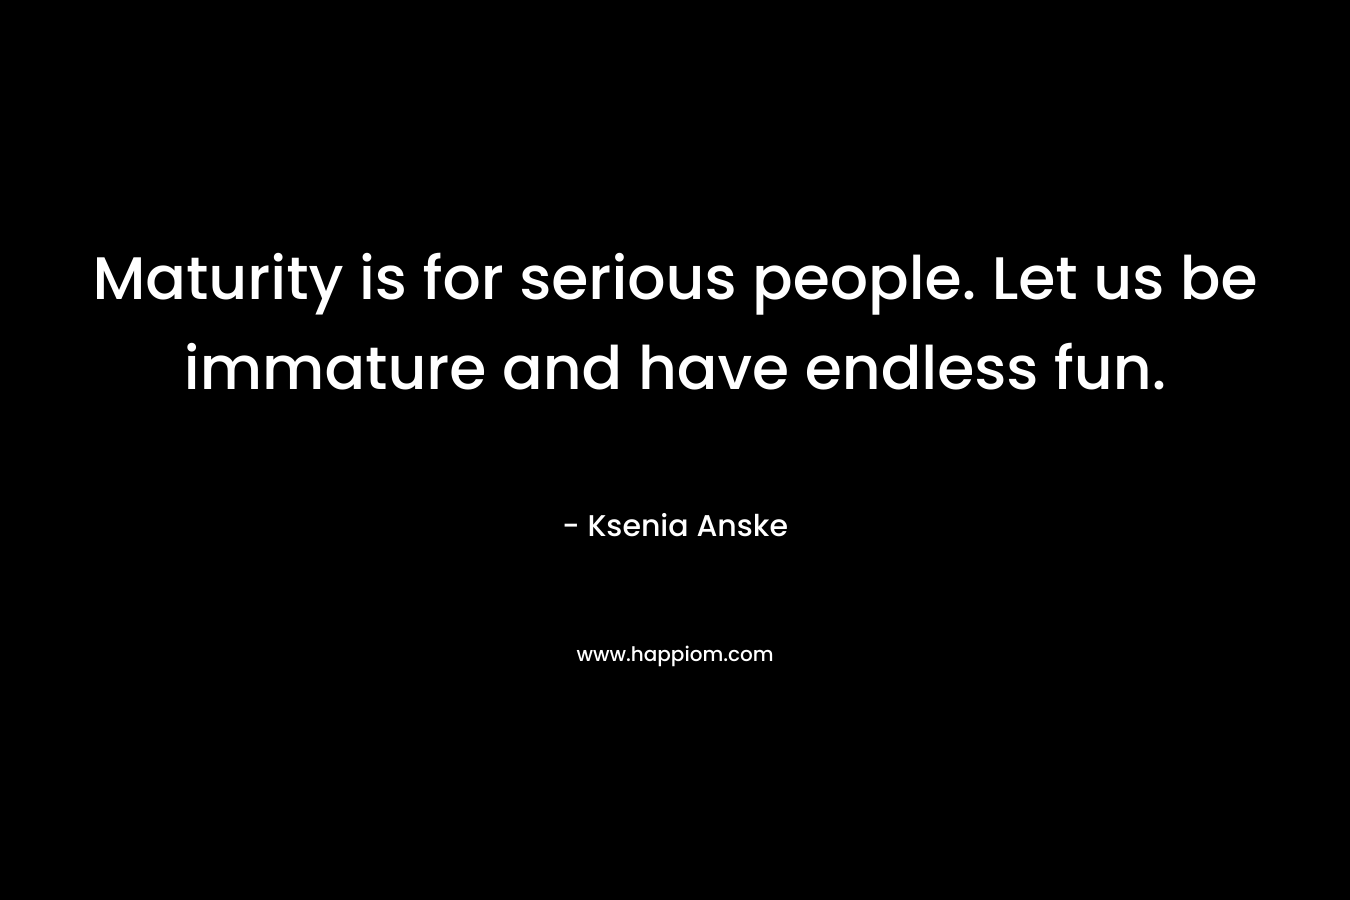 Maturity is for serious people. Let us be immature and have endless fun.